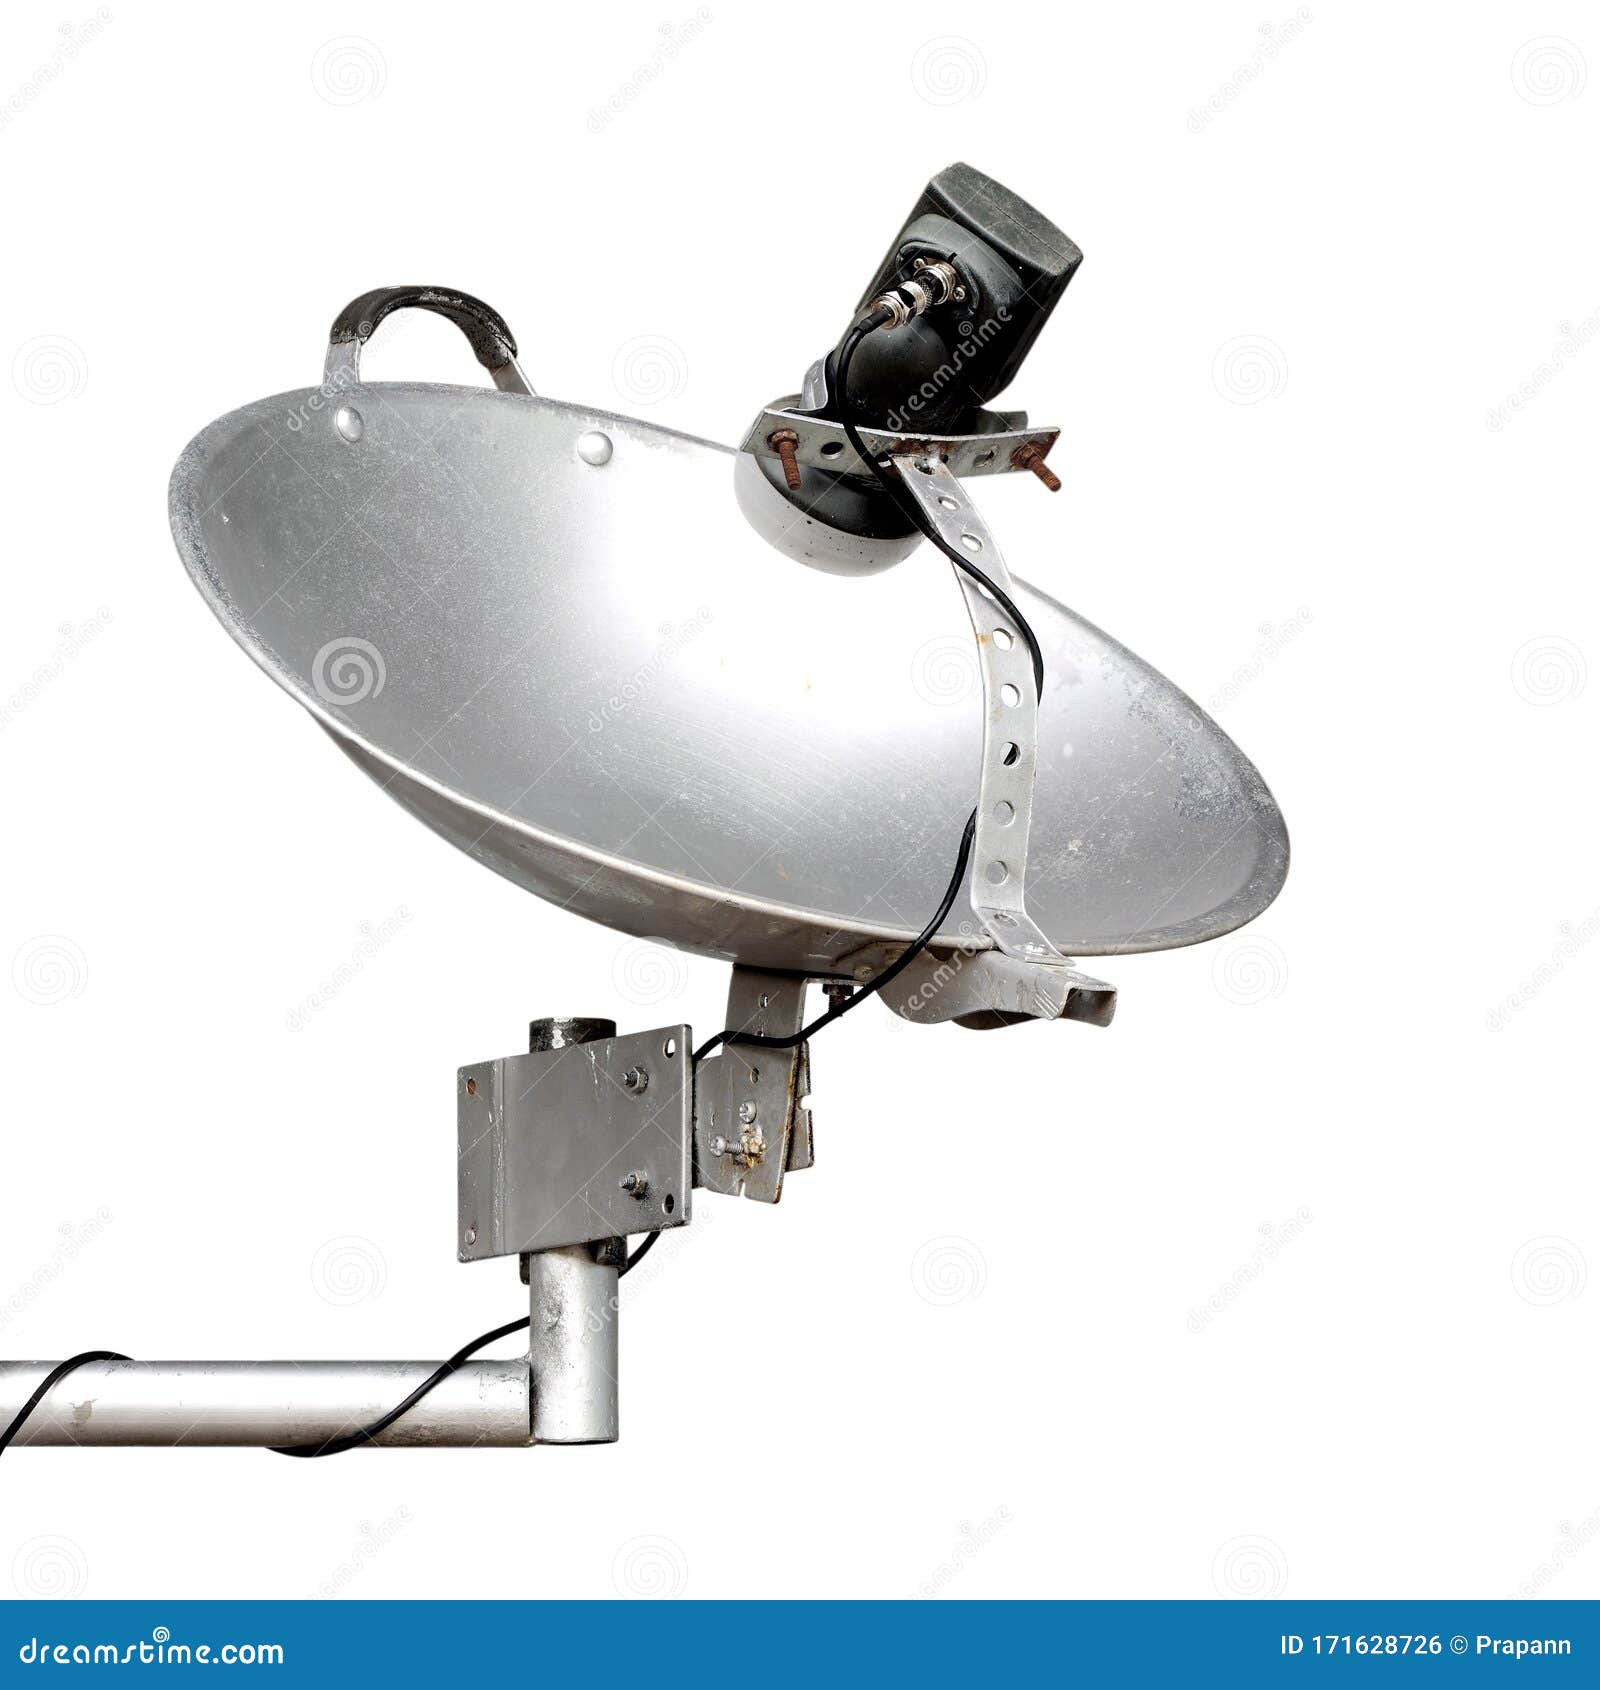 Diy Local Satellite Dish Made From Pan Stock Photo Image Of Internet Receiver 171628726